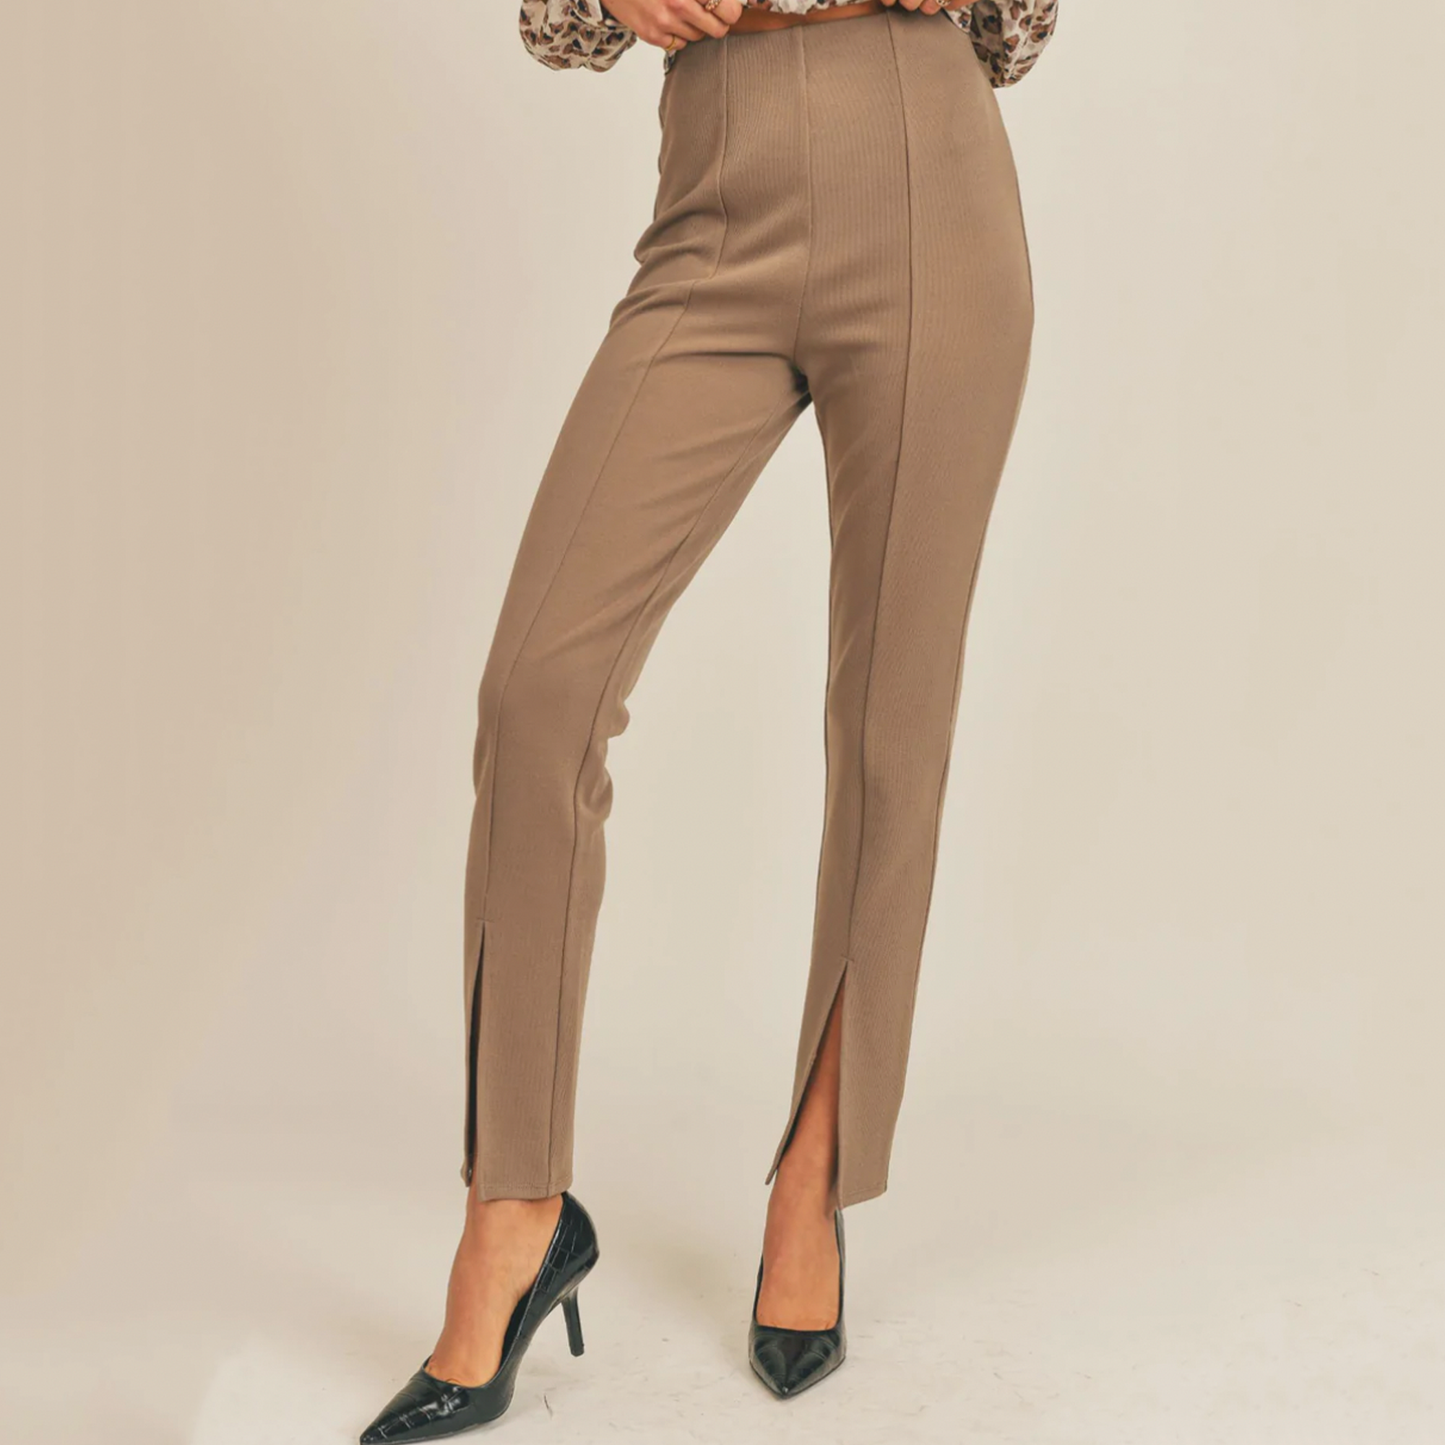 Sage The Label Roundabout Front Slit Pant. These super cute Roundabout Pants feature a split hem with high-waist. Perfect for sprucing up your outfit! 